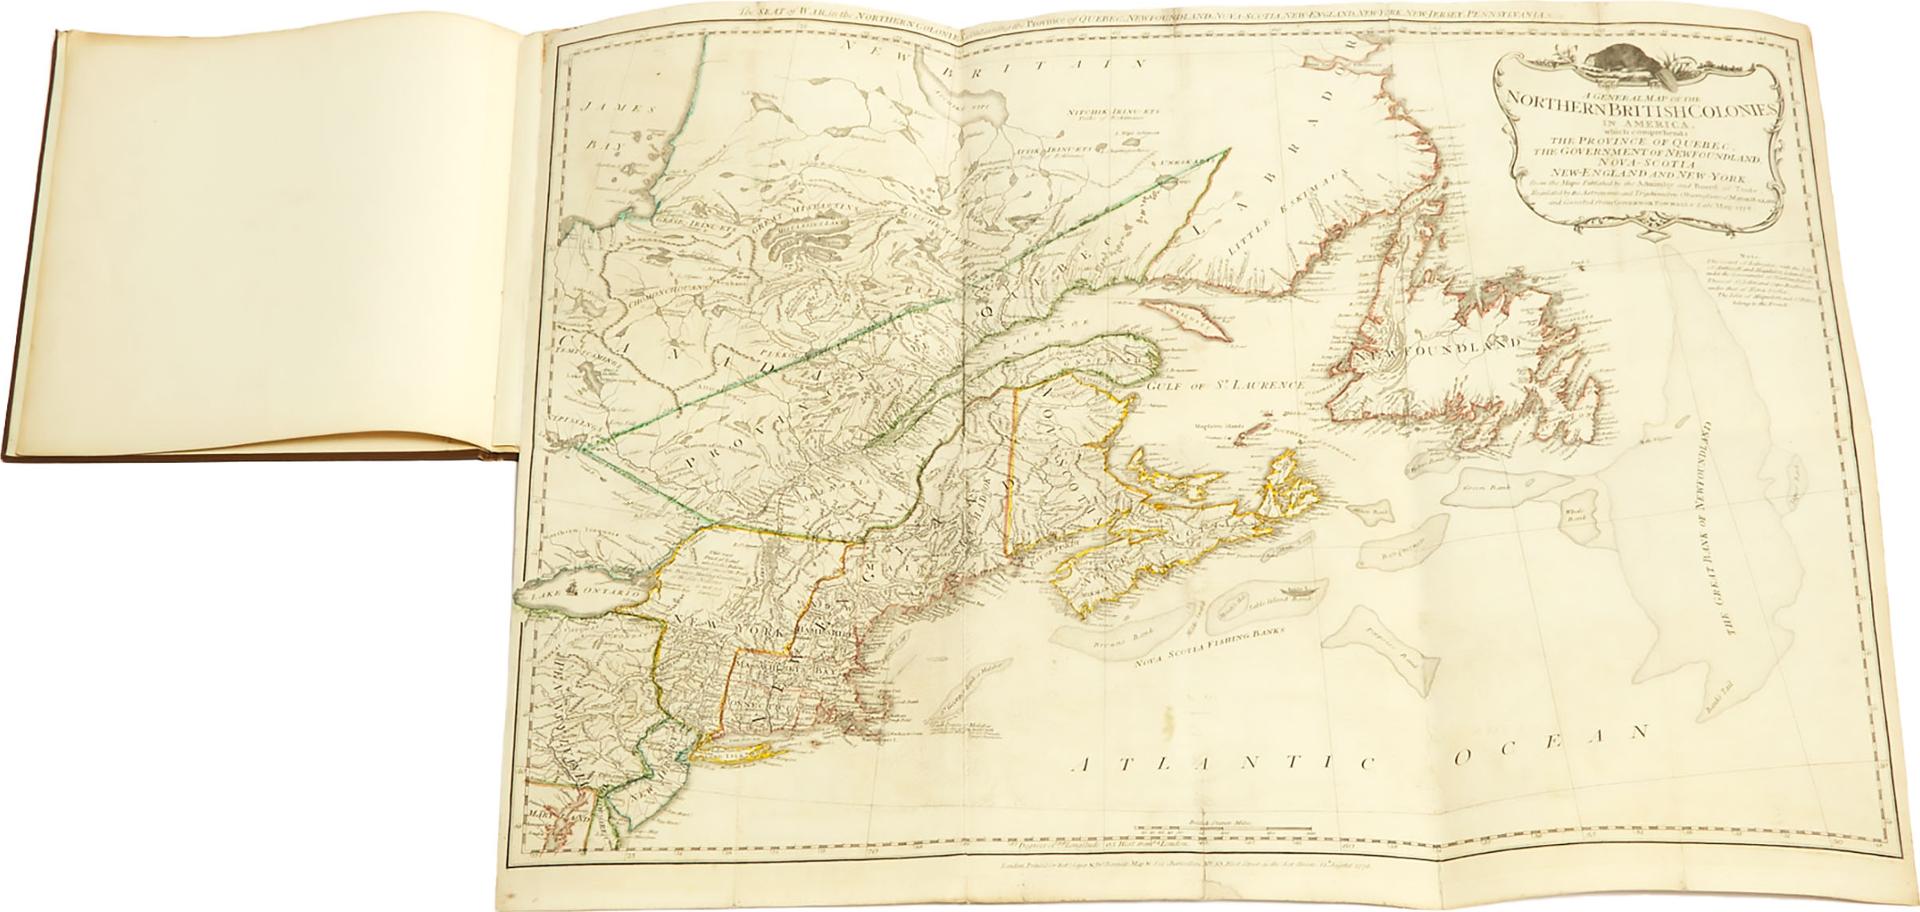 Robert Sayer - A General Map Of The Northern British Colonies In America, Which Comprehends The Province Of Quebec, The Government Of Newfoundland, Nova-Scotia, New-England And New-York